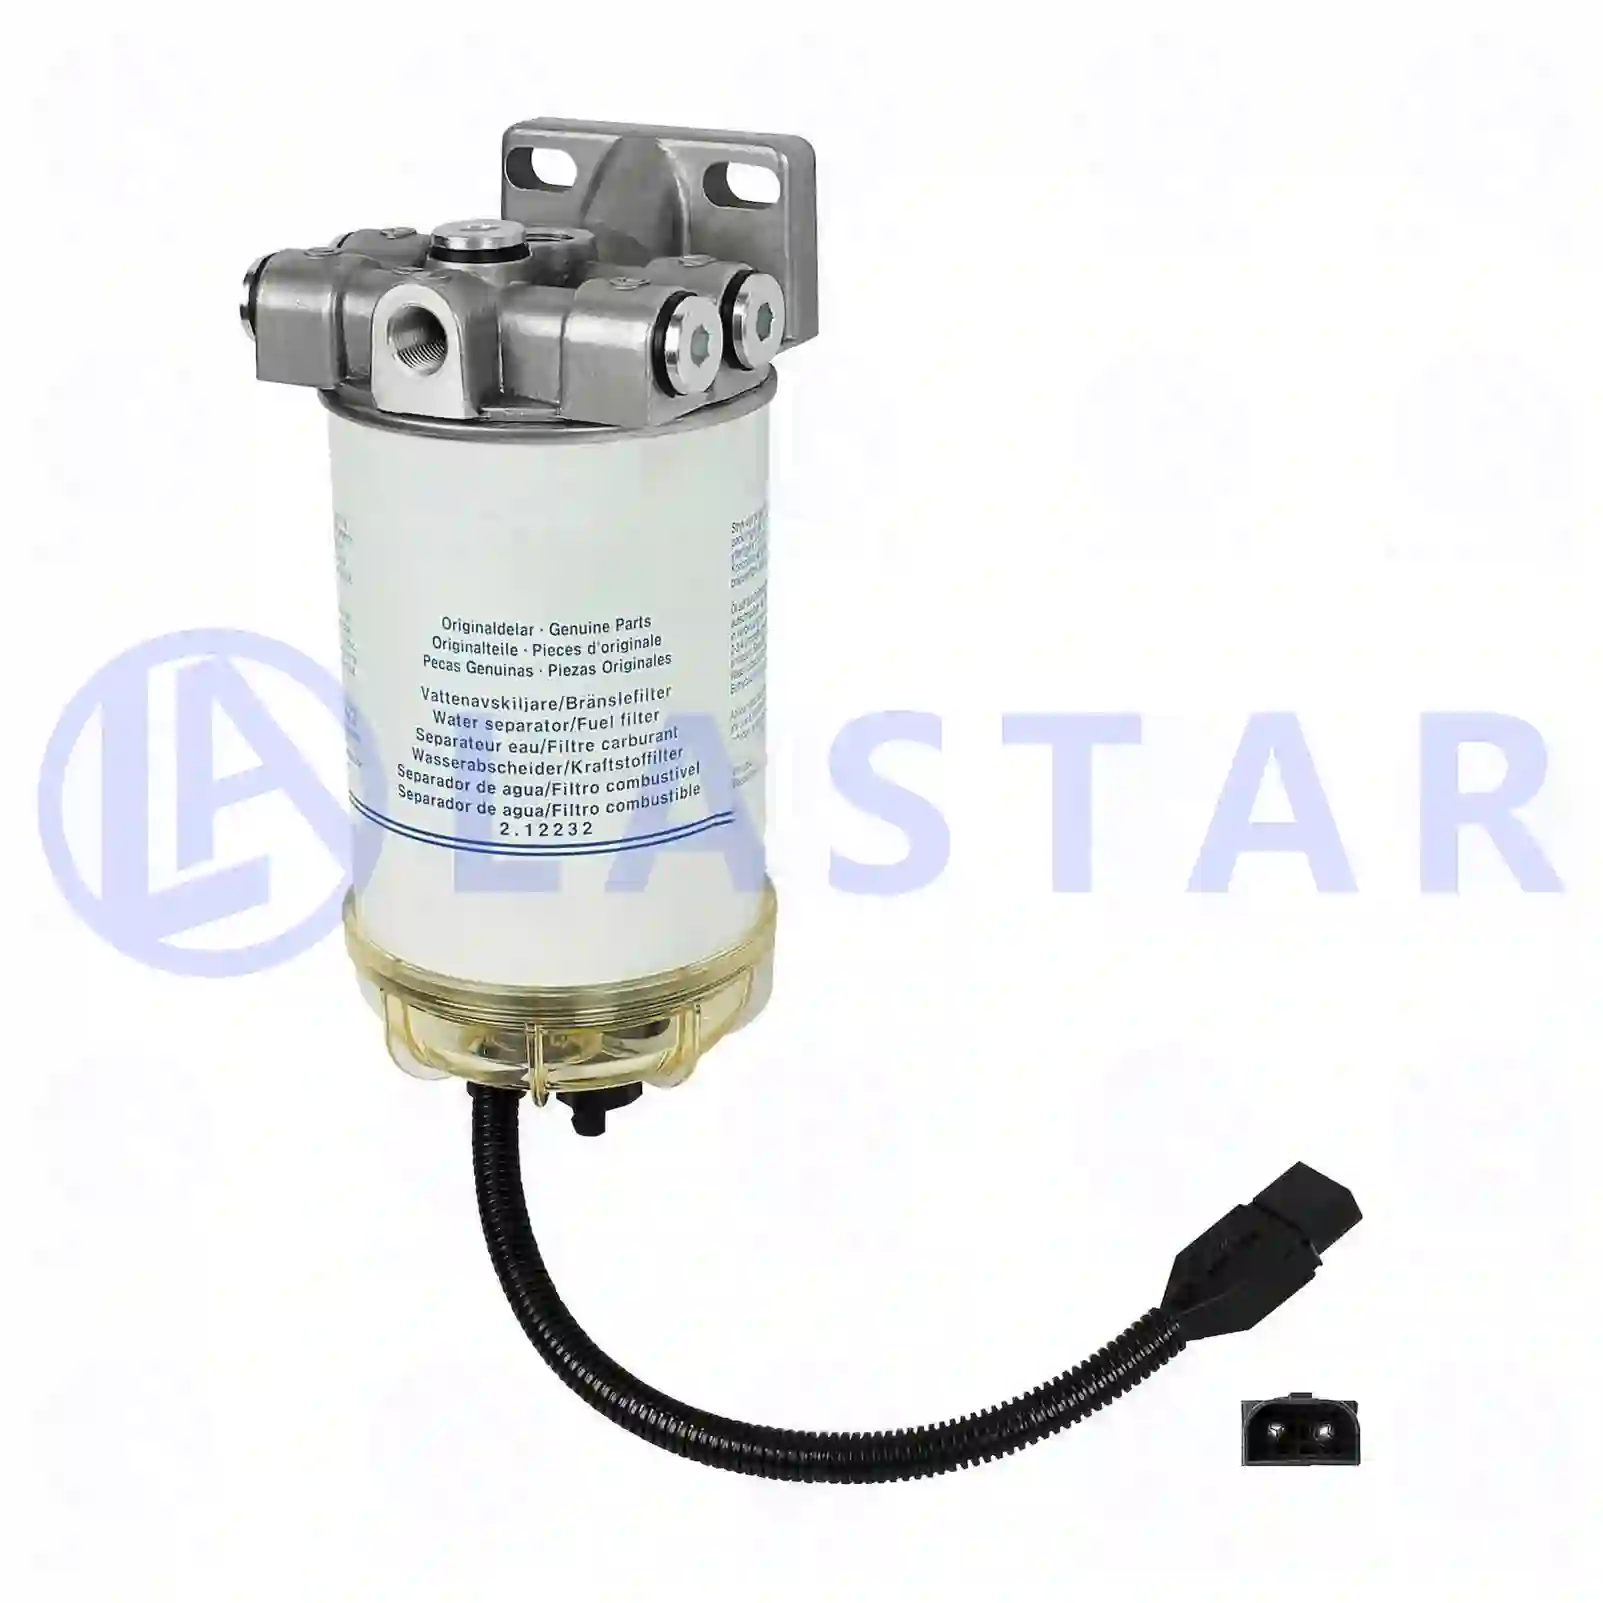  Fuel filter, water separator, complete - fuel preheater || Lastar Spare Part | Truck Spare Parts, Auotomotive Spare Parts